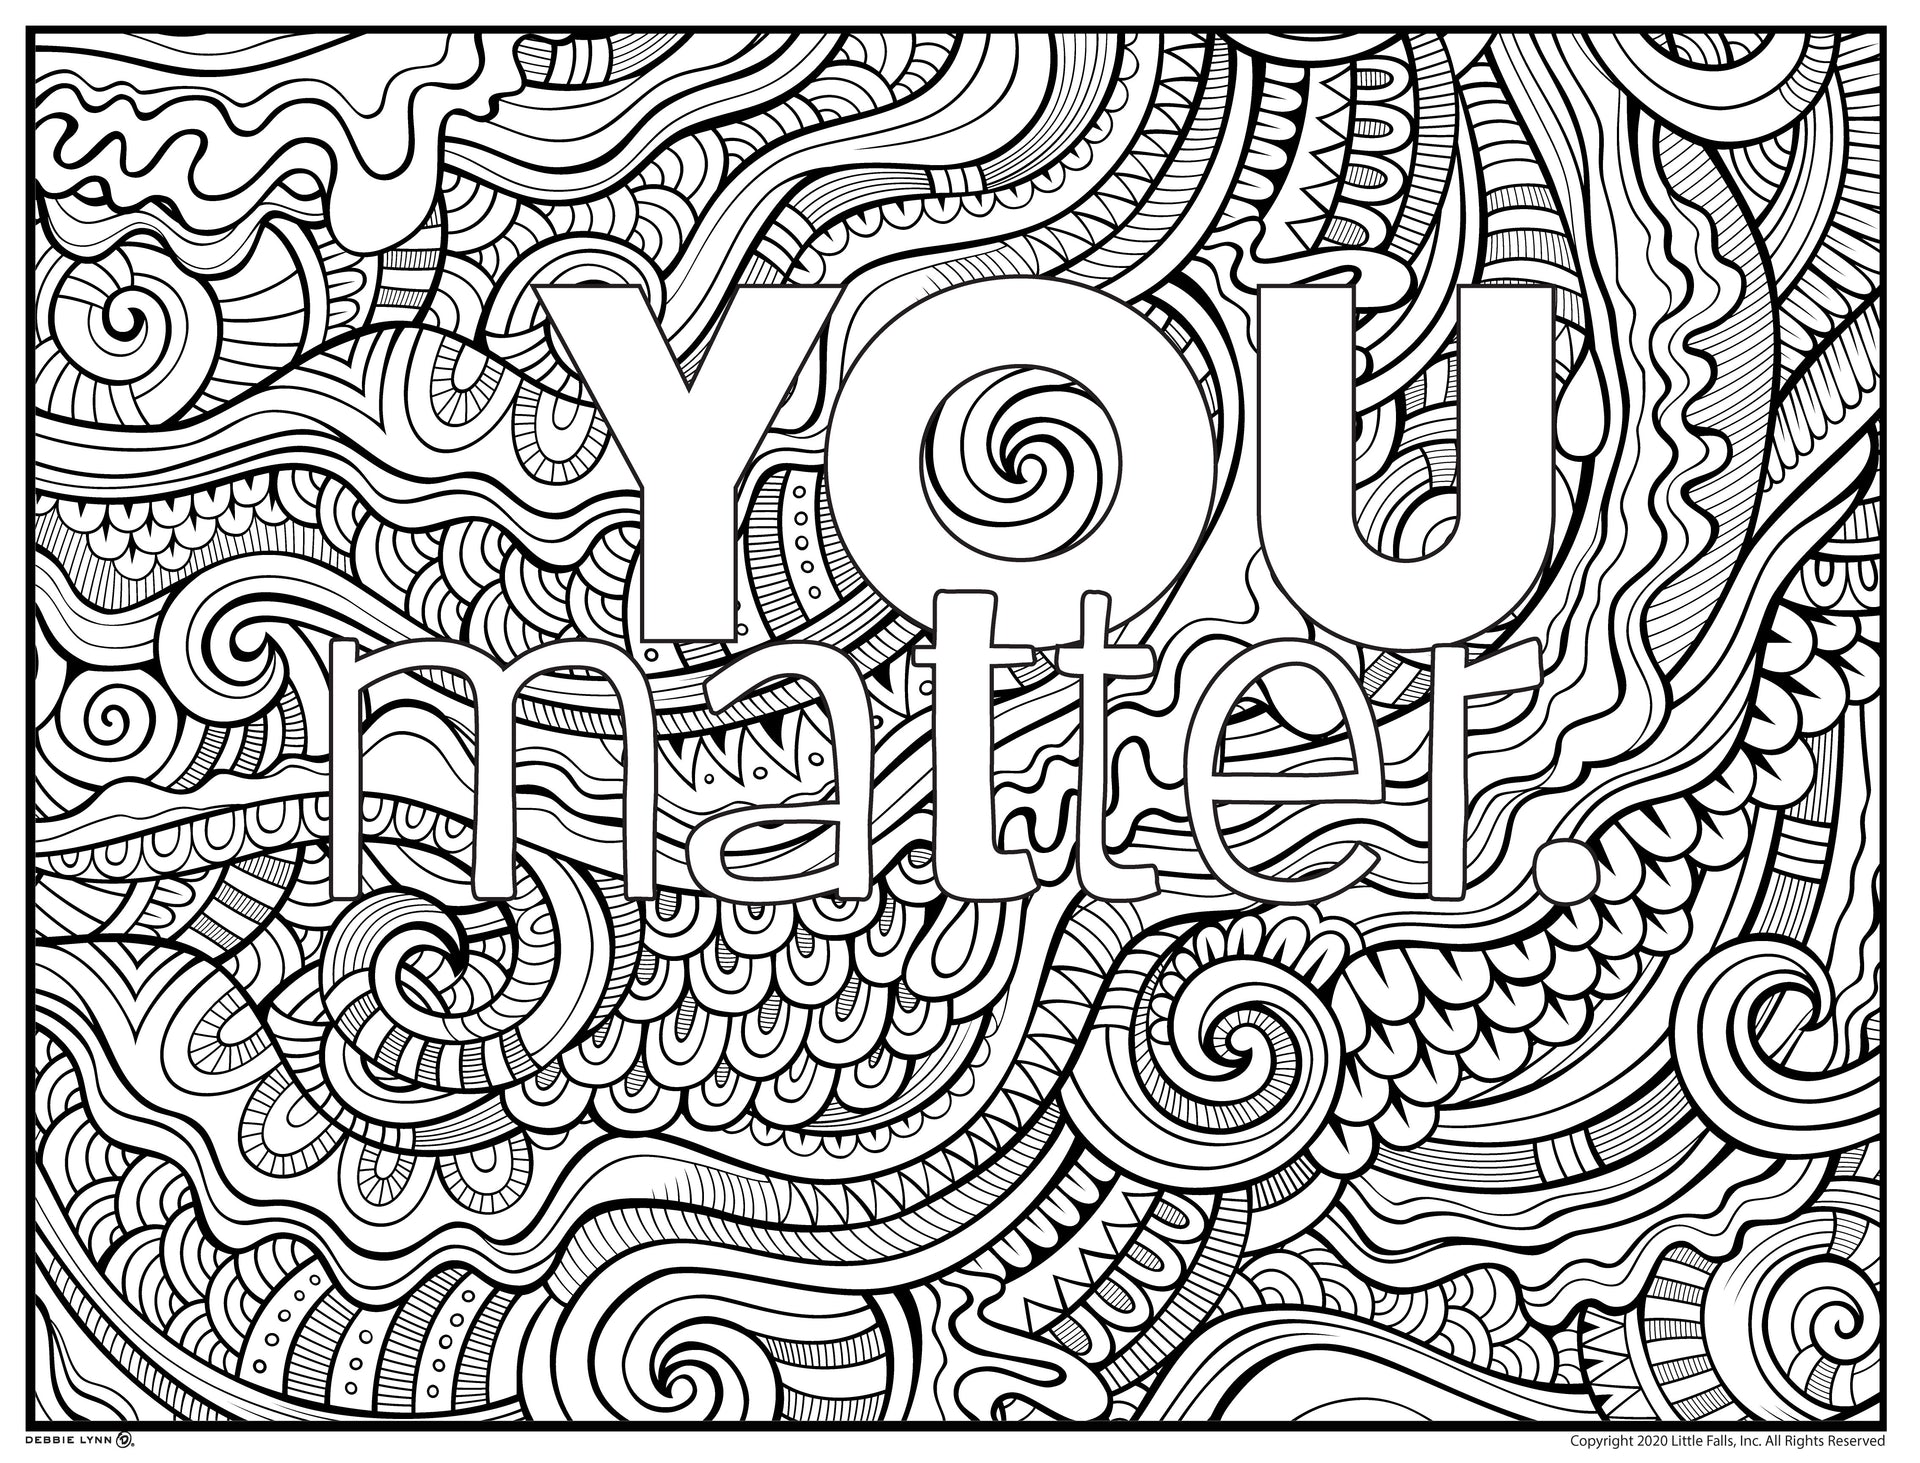 Debbie Lynn – The Original Jumbo Coloring Poster. Huge 48” x 63” Format. Made in The USA. Relax, Unwind, Color with Kids, Family, and Friends. (Know